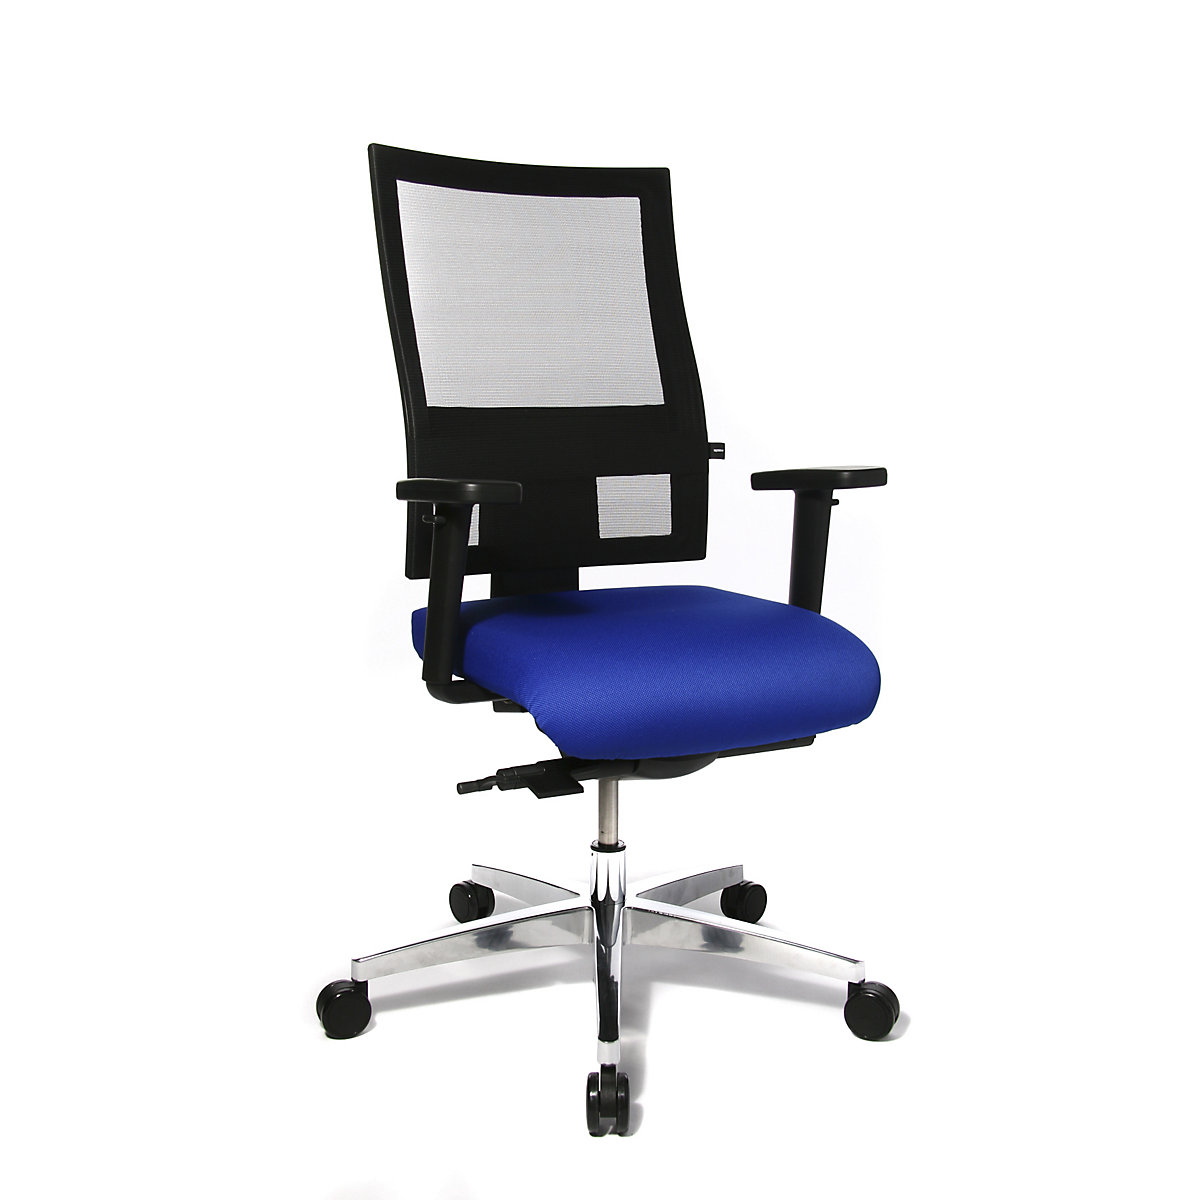 PROFI NET 11 office swivel chair – Topstar, height adjustable arm rests with soft padding, blue-3